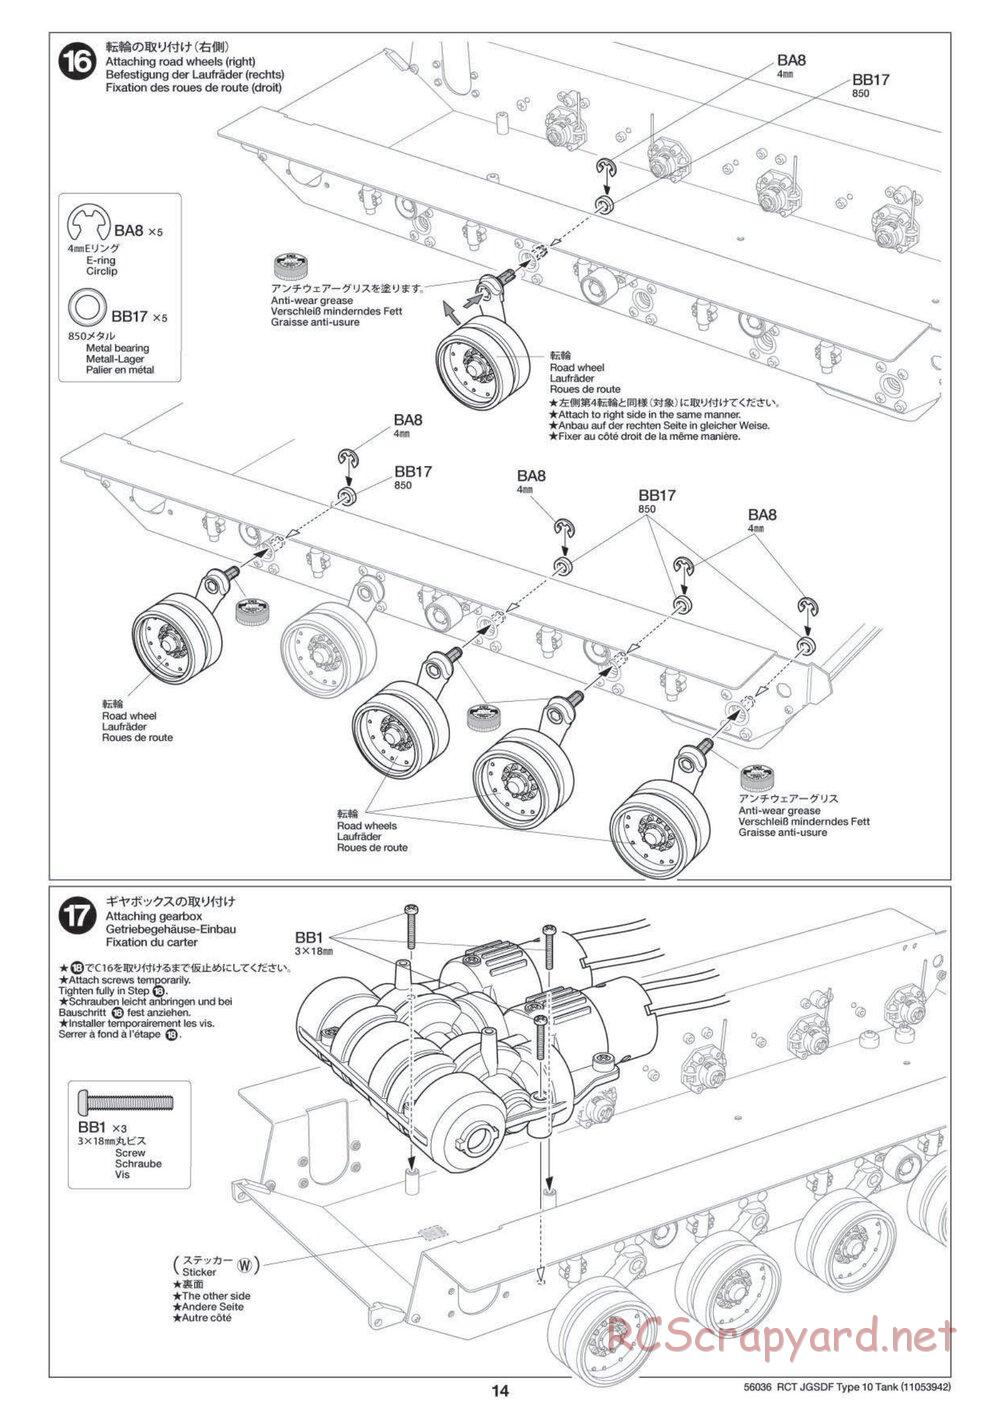 Tamiya - JGSDF Type 10 Tank - 1/16 Scale Chassis - Manual - Page 14